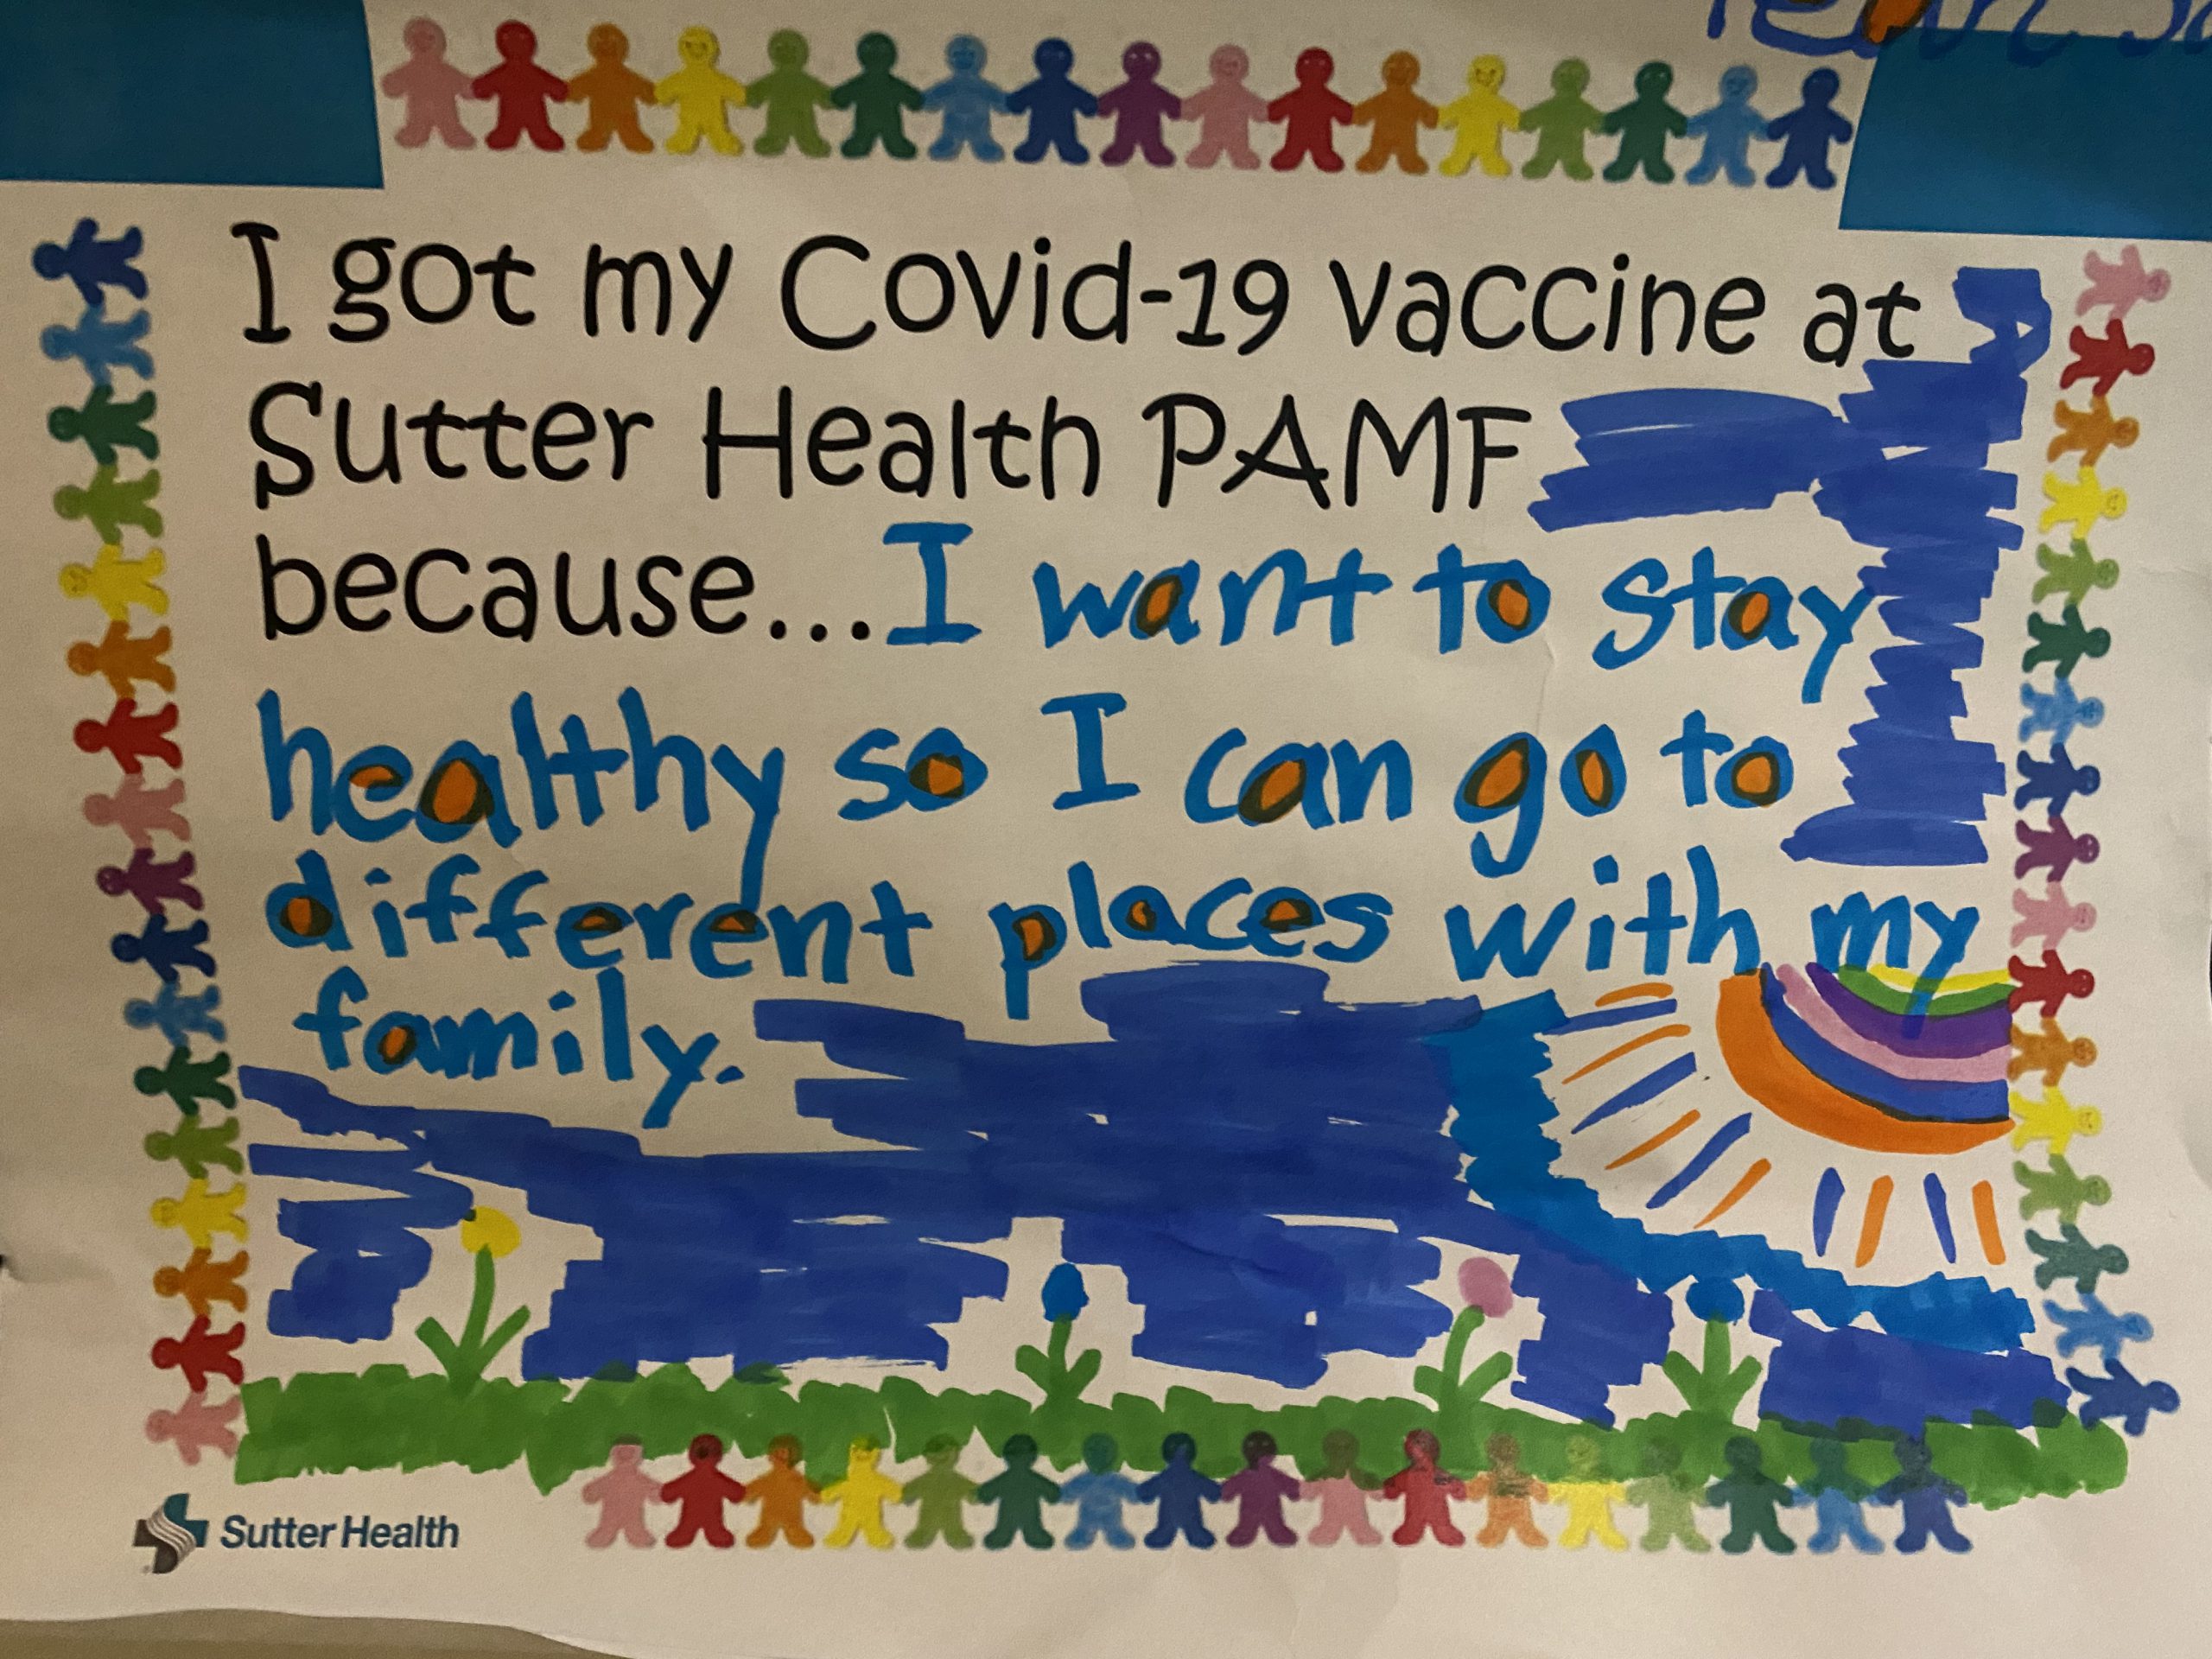 Child's colorful drawing displayed at a Sutter Health COVID vaccination clinic. It reads I got my COVID-19 vaccine at Sutter Health PAMF because...I want to stay healthy so I can go different places with my family.